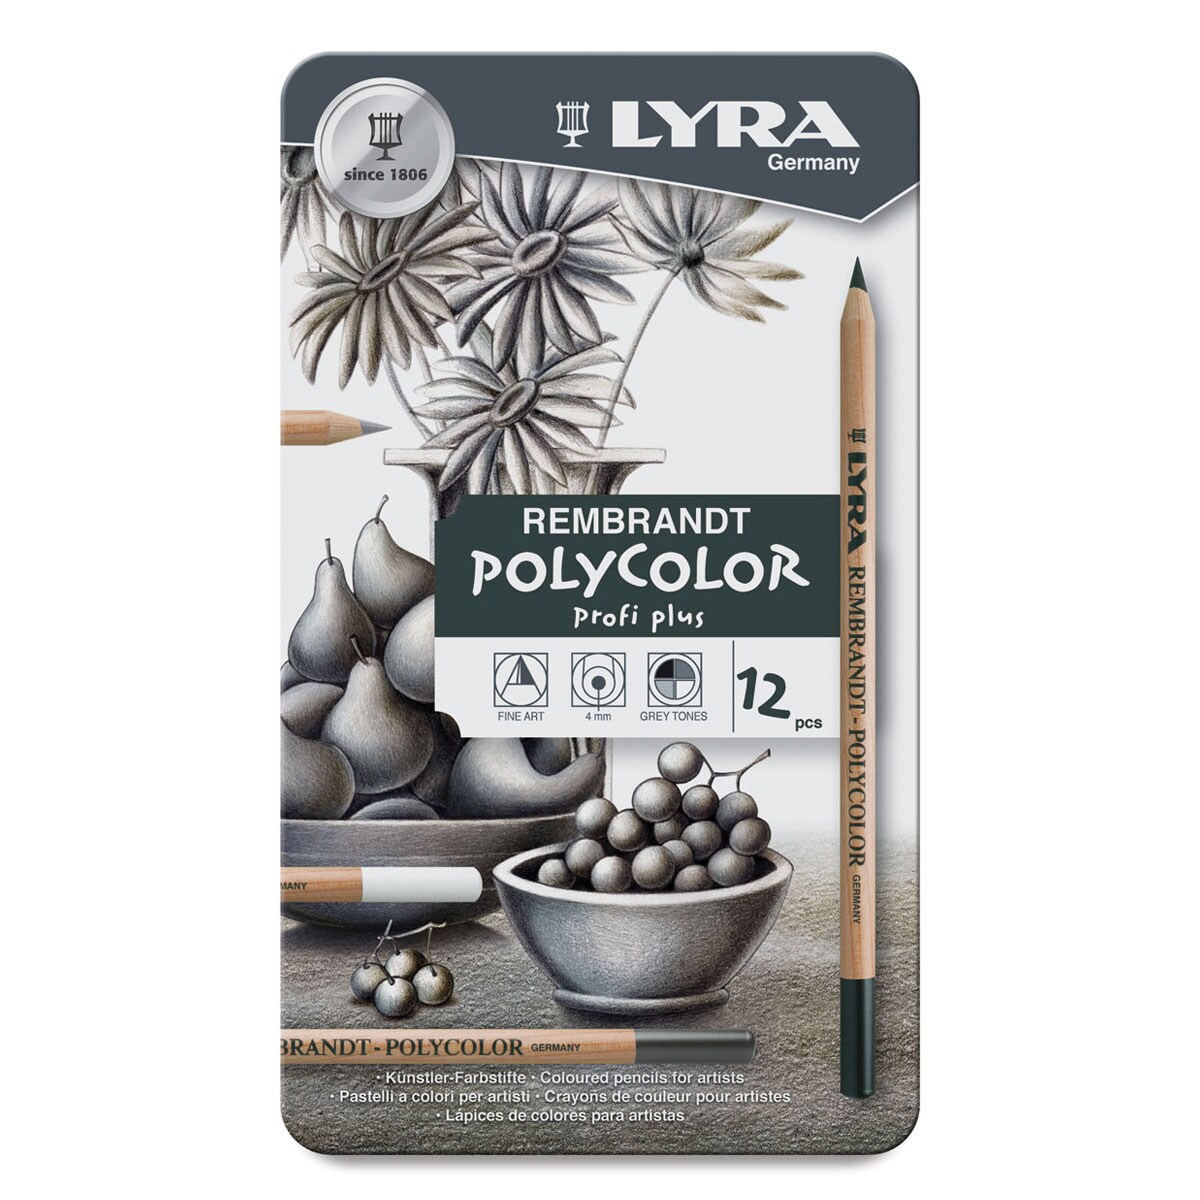 Lyra Rembrandt Polycolor Premium Oil-Based Colored Pencil Set - Assorted Greys, Set of 12